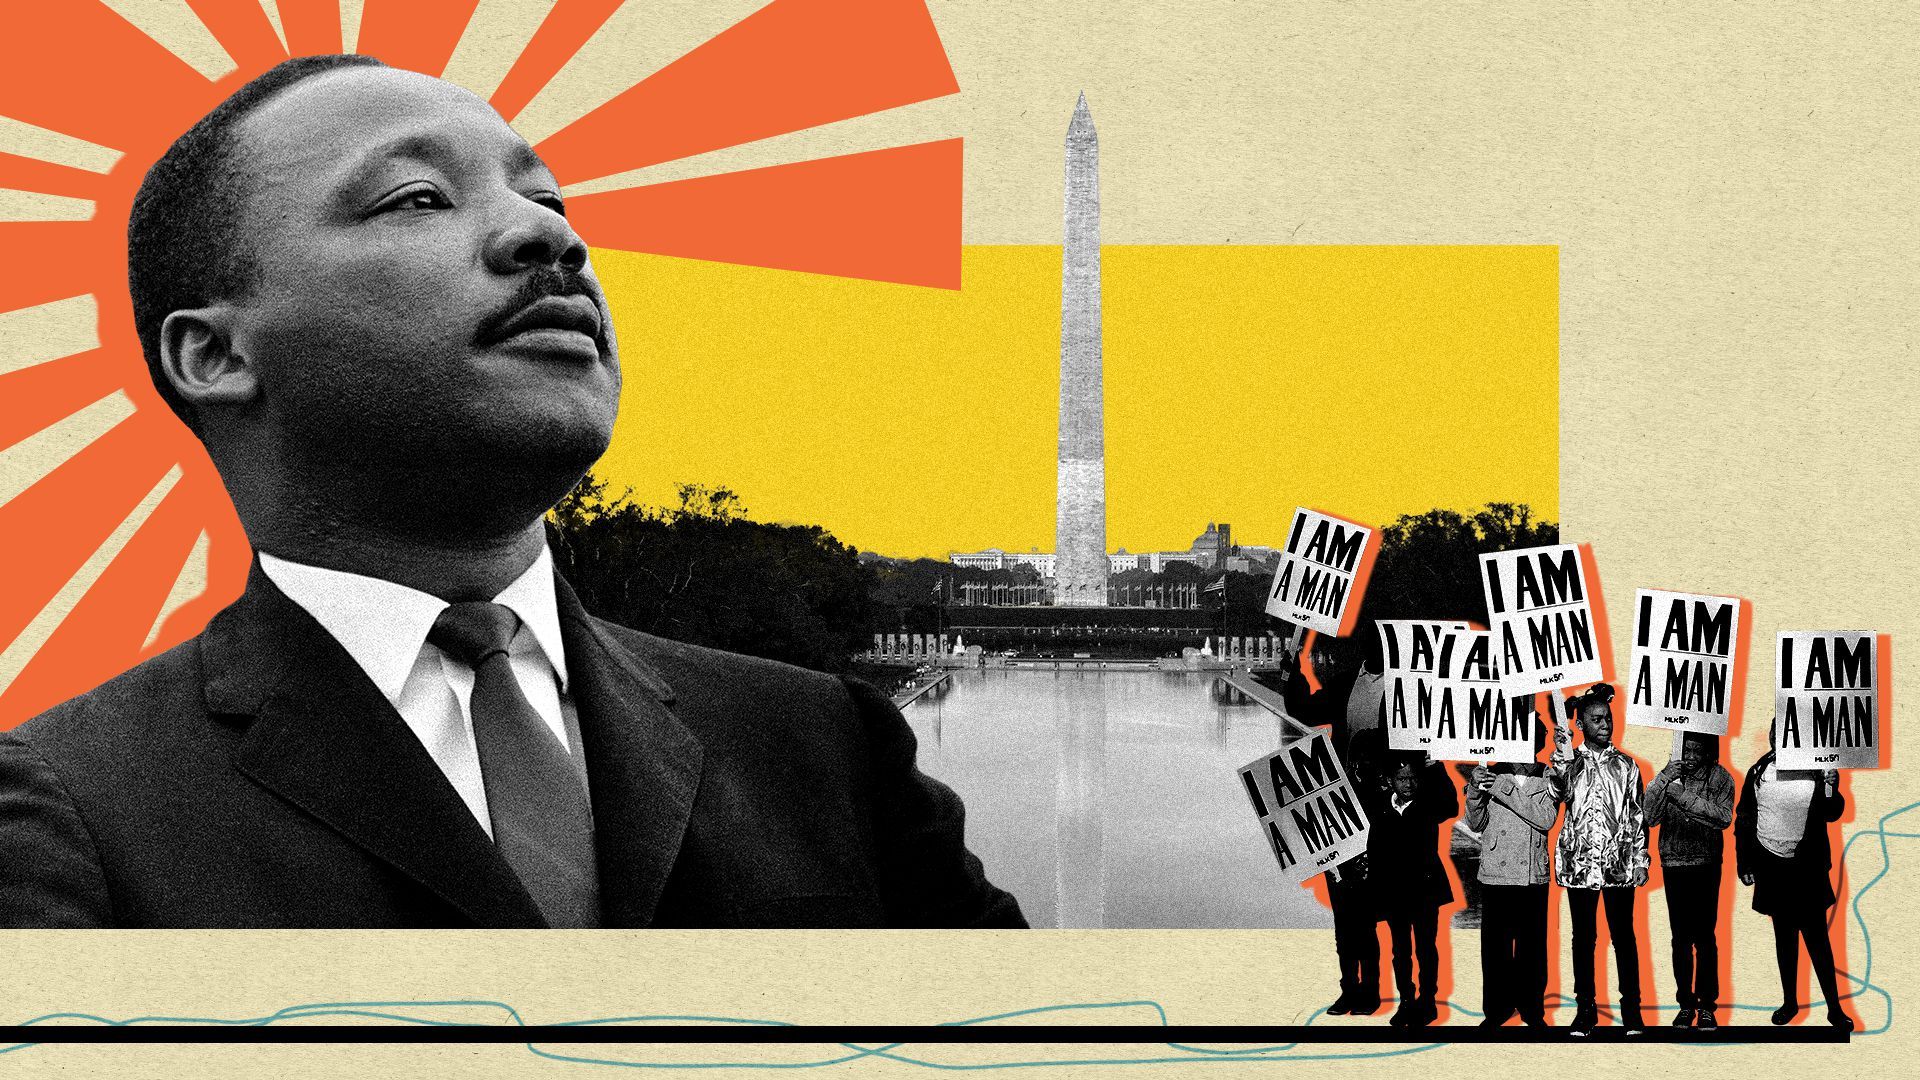 Photo illustration of Dr. Martin Luther King Jr. and children holding "I am a Man" signs with the WashingtonMonument in the background.